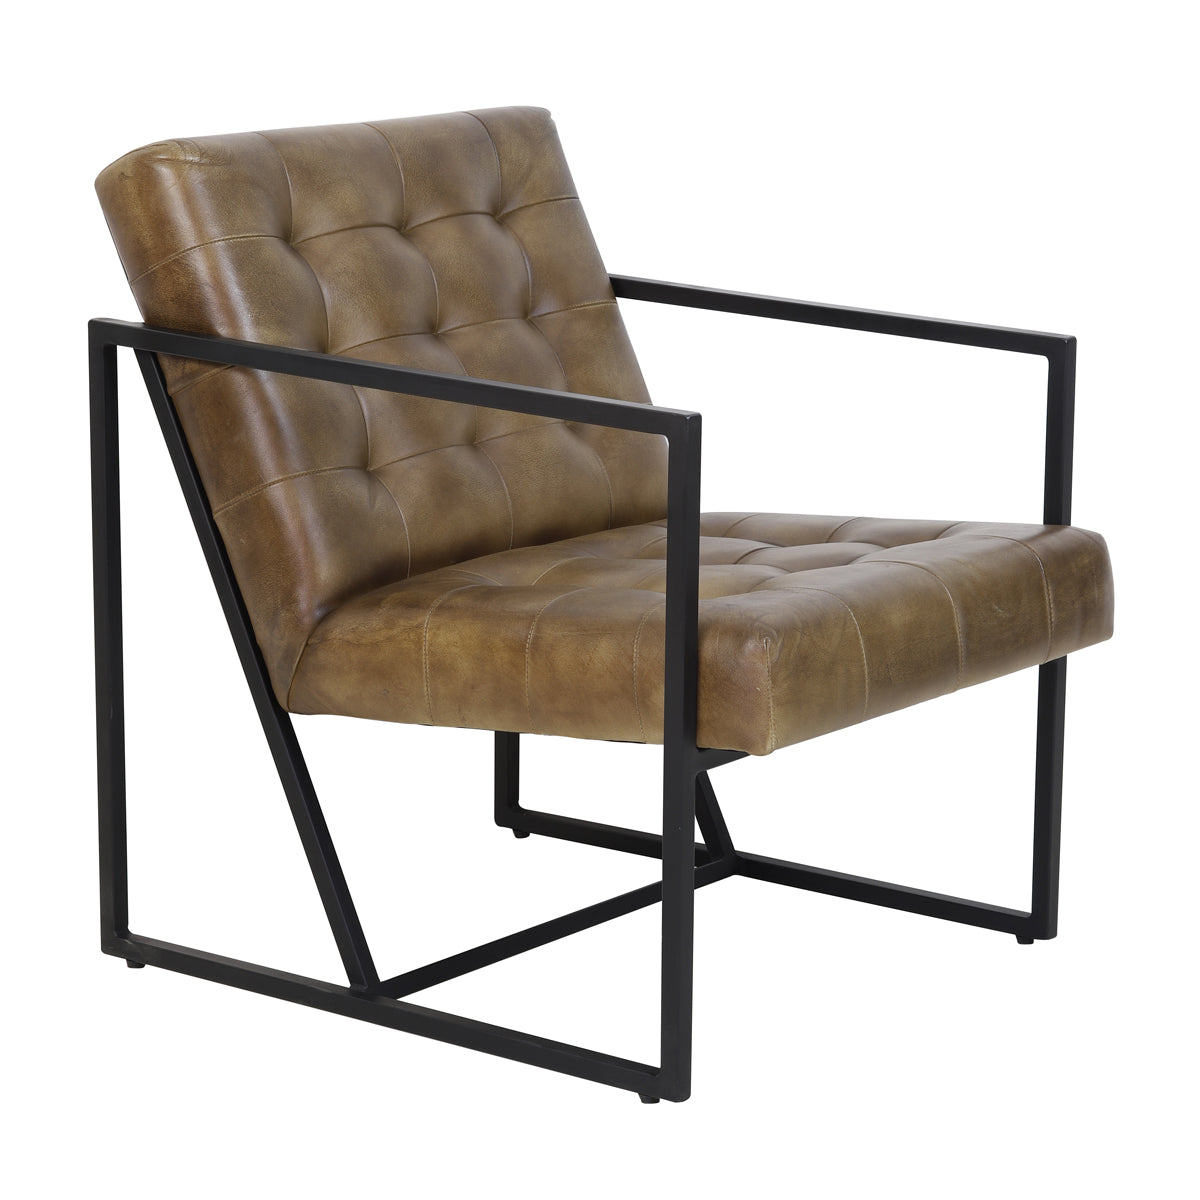 Rascino Chair in Brown Leather